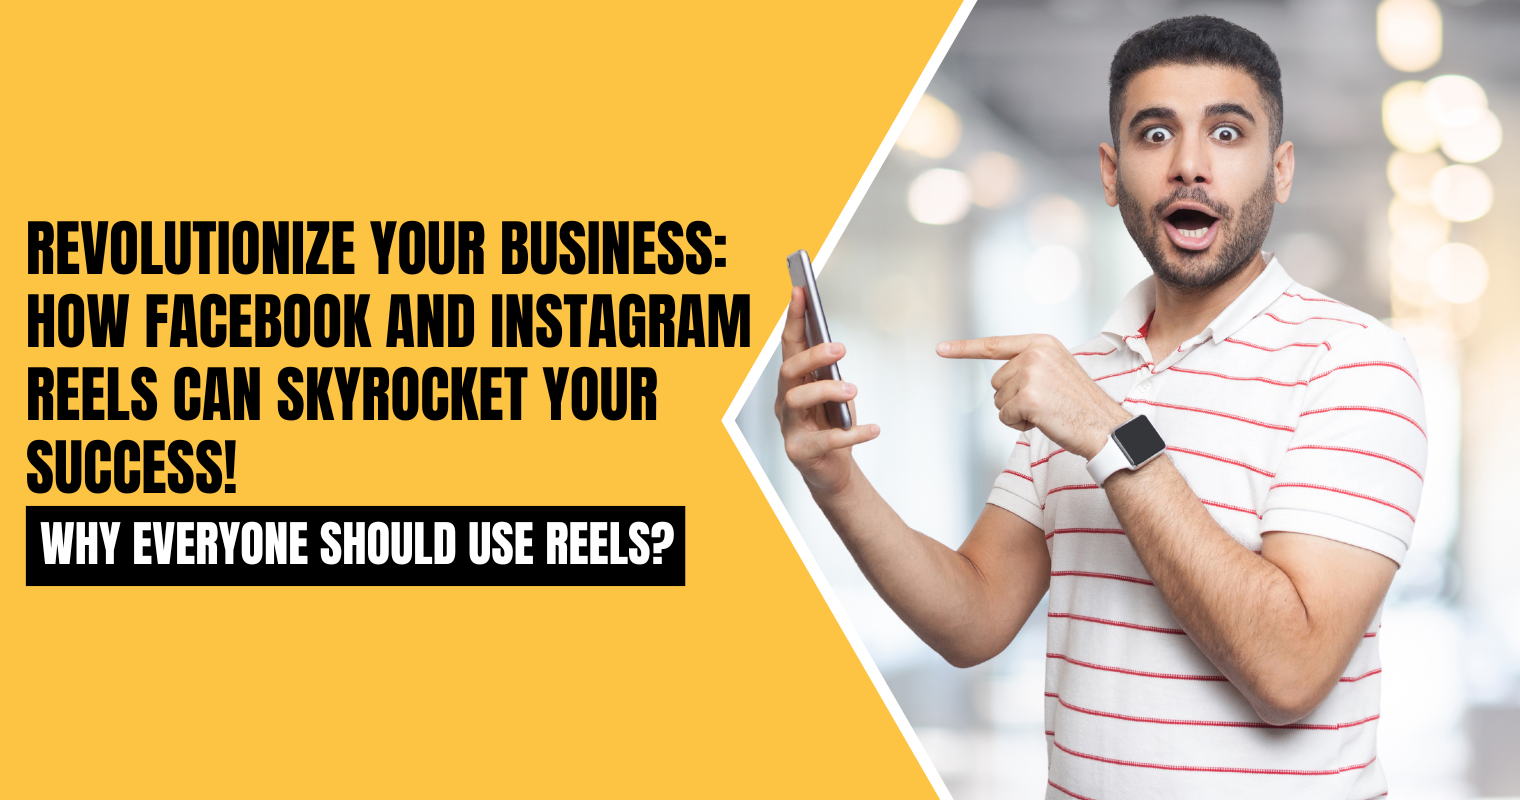 Revolutionize Your Business: How Facebook and Instagram Reels Can Skyrocket Your Success!